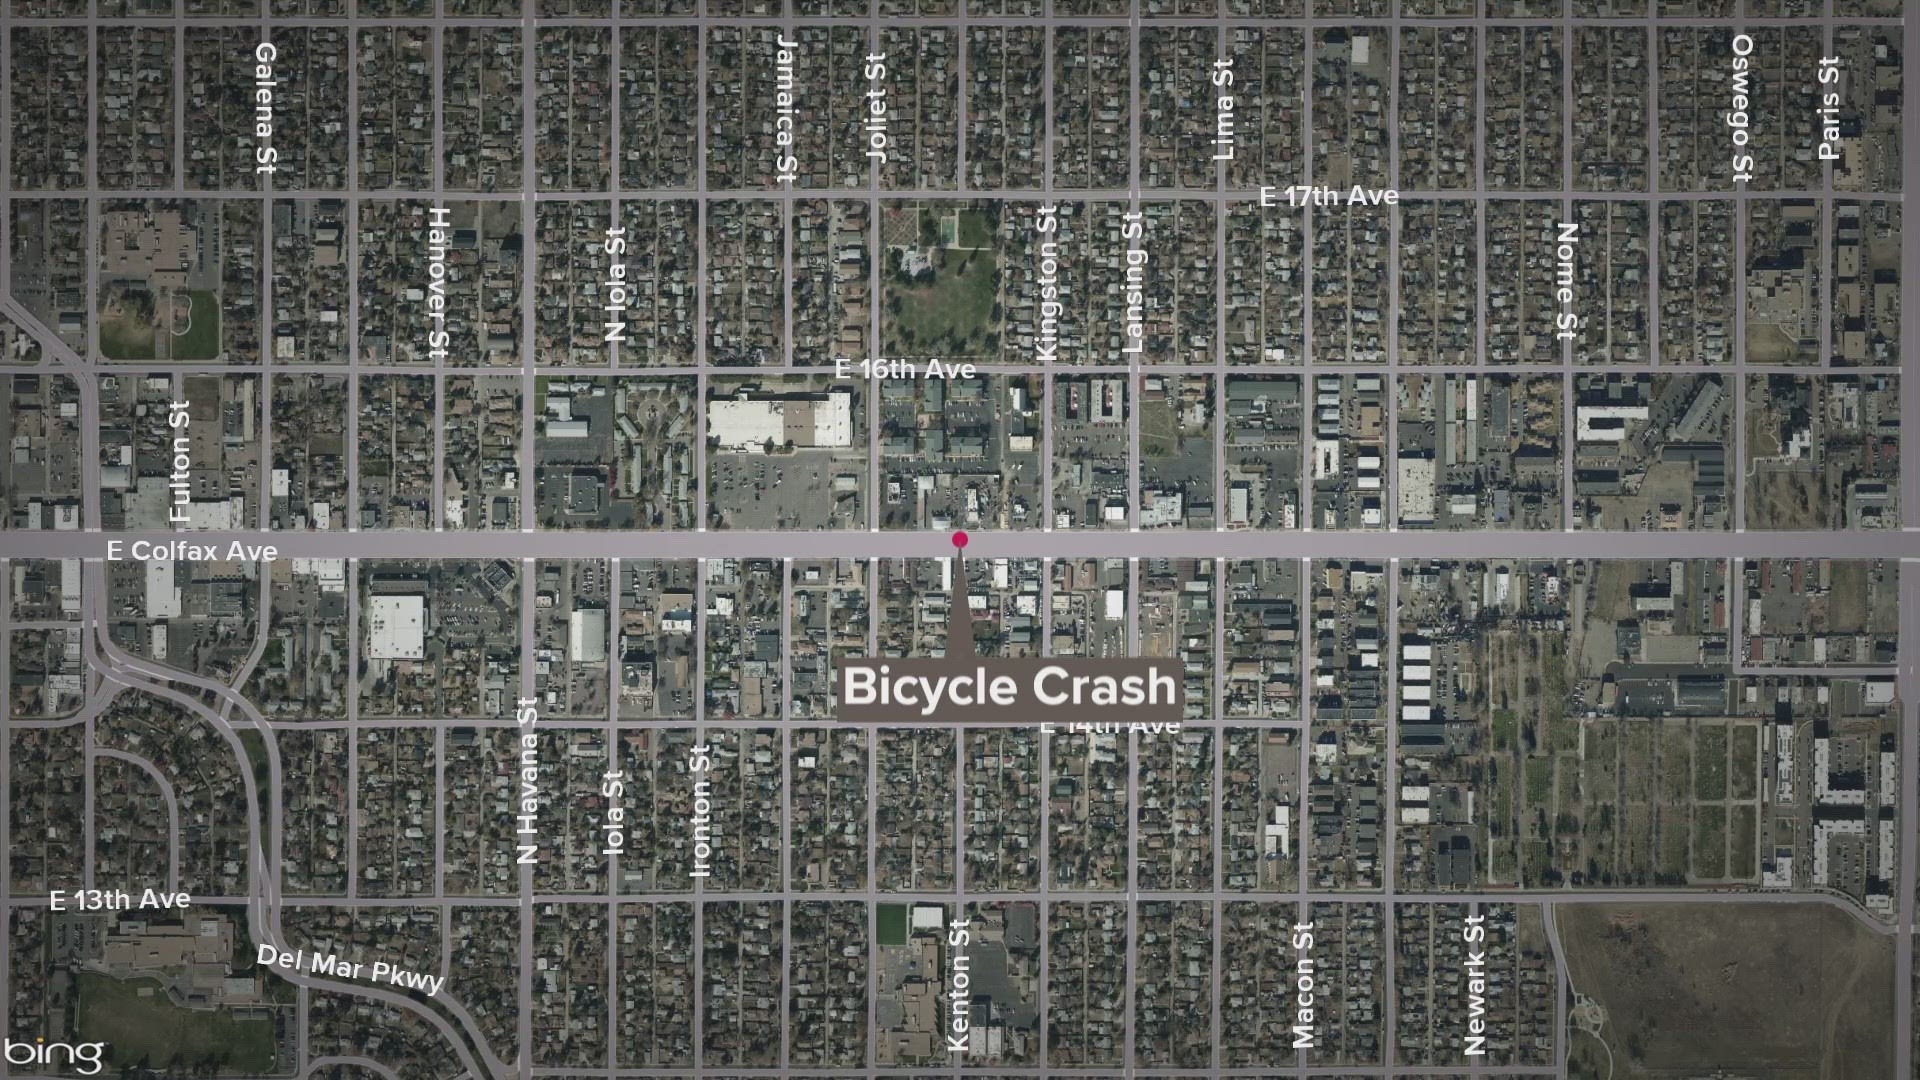 A man riding his bicycle was struck and killed near East Colfax Avenue and Kenton Street, according to Aurora Police.